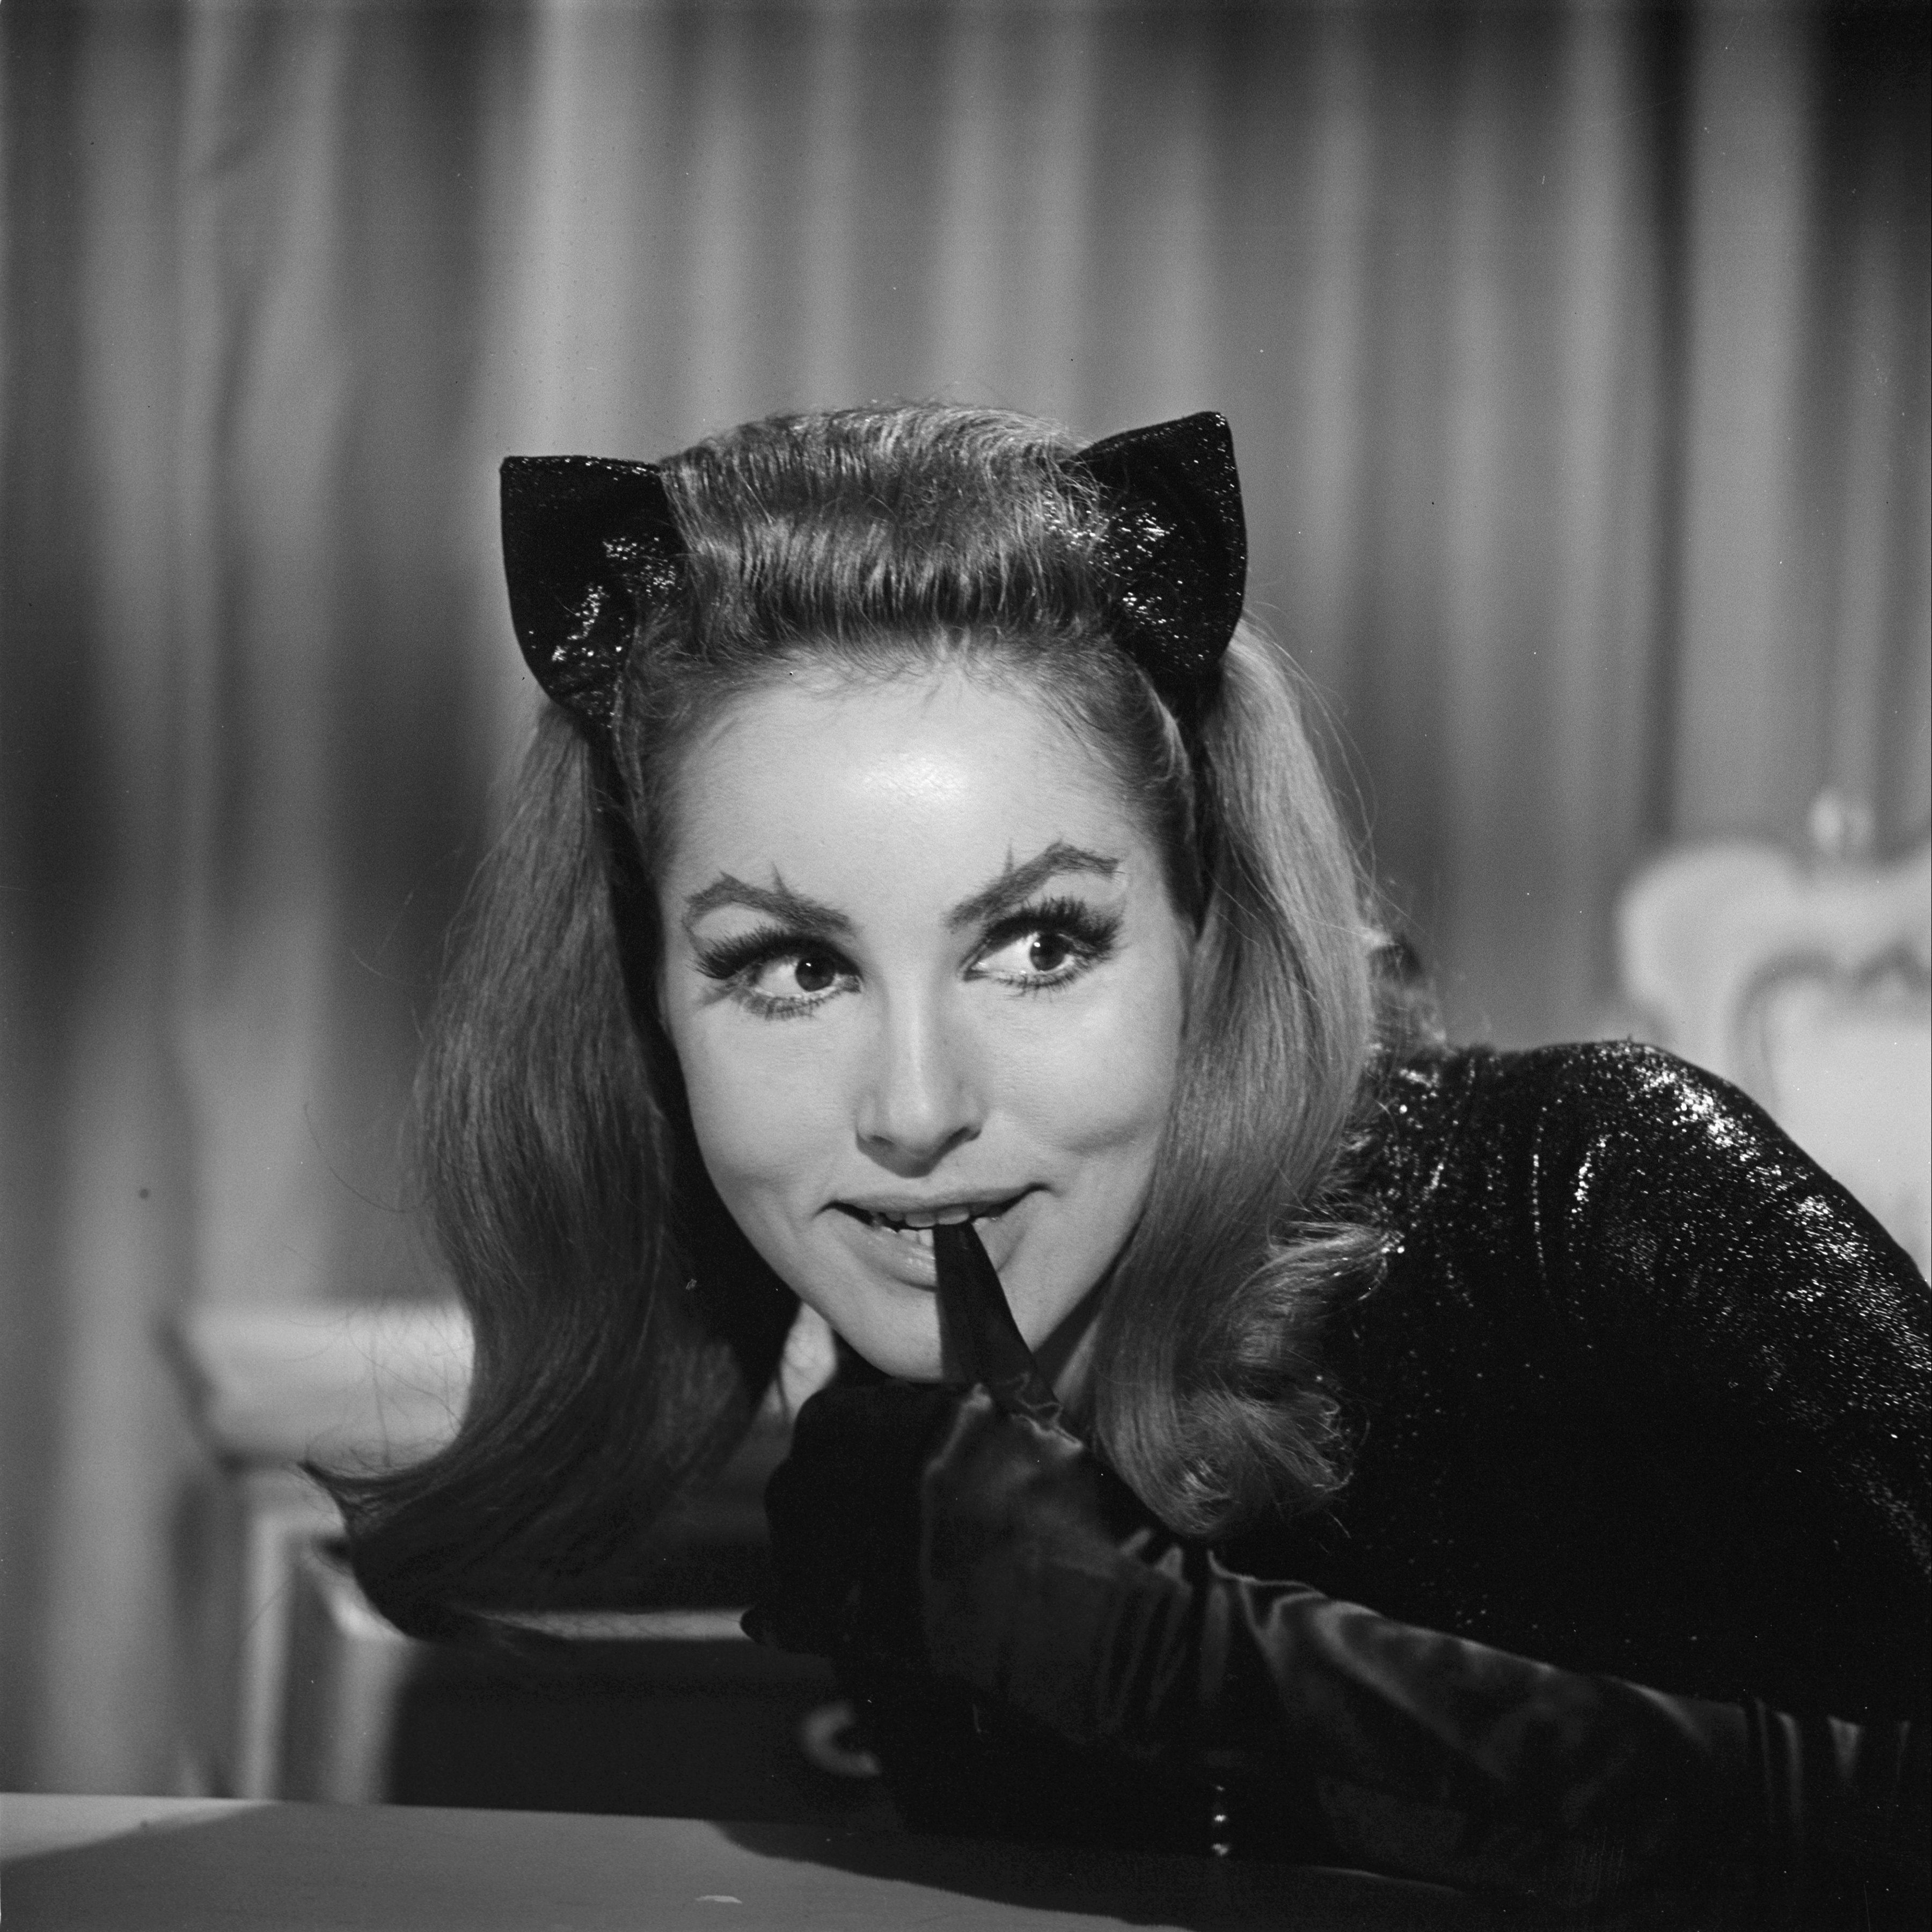 Julie Newmar as Catwoman in "The Purr-fect Crime" aired March 16, 1966 | Source: Getty Images